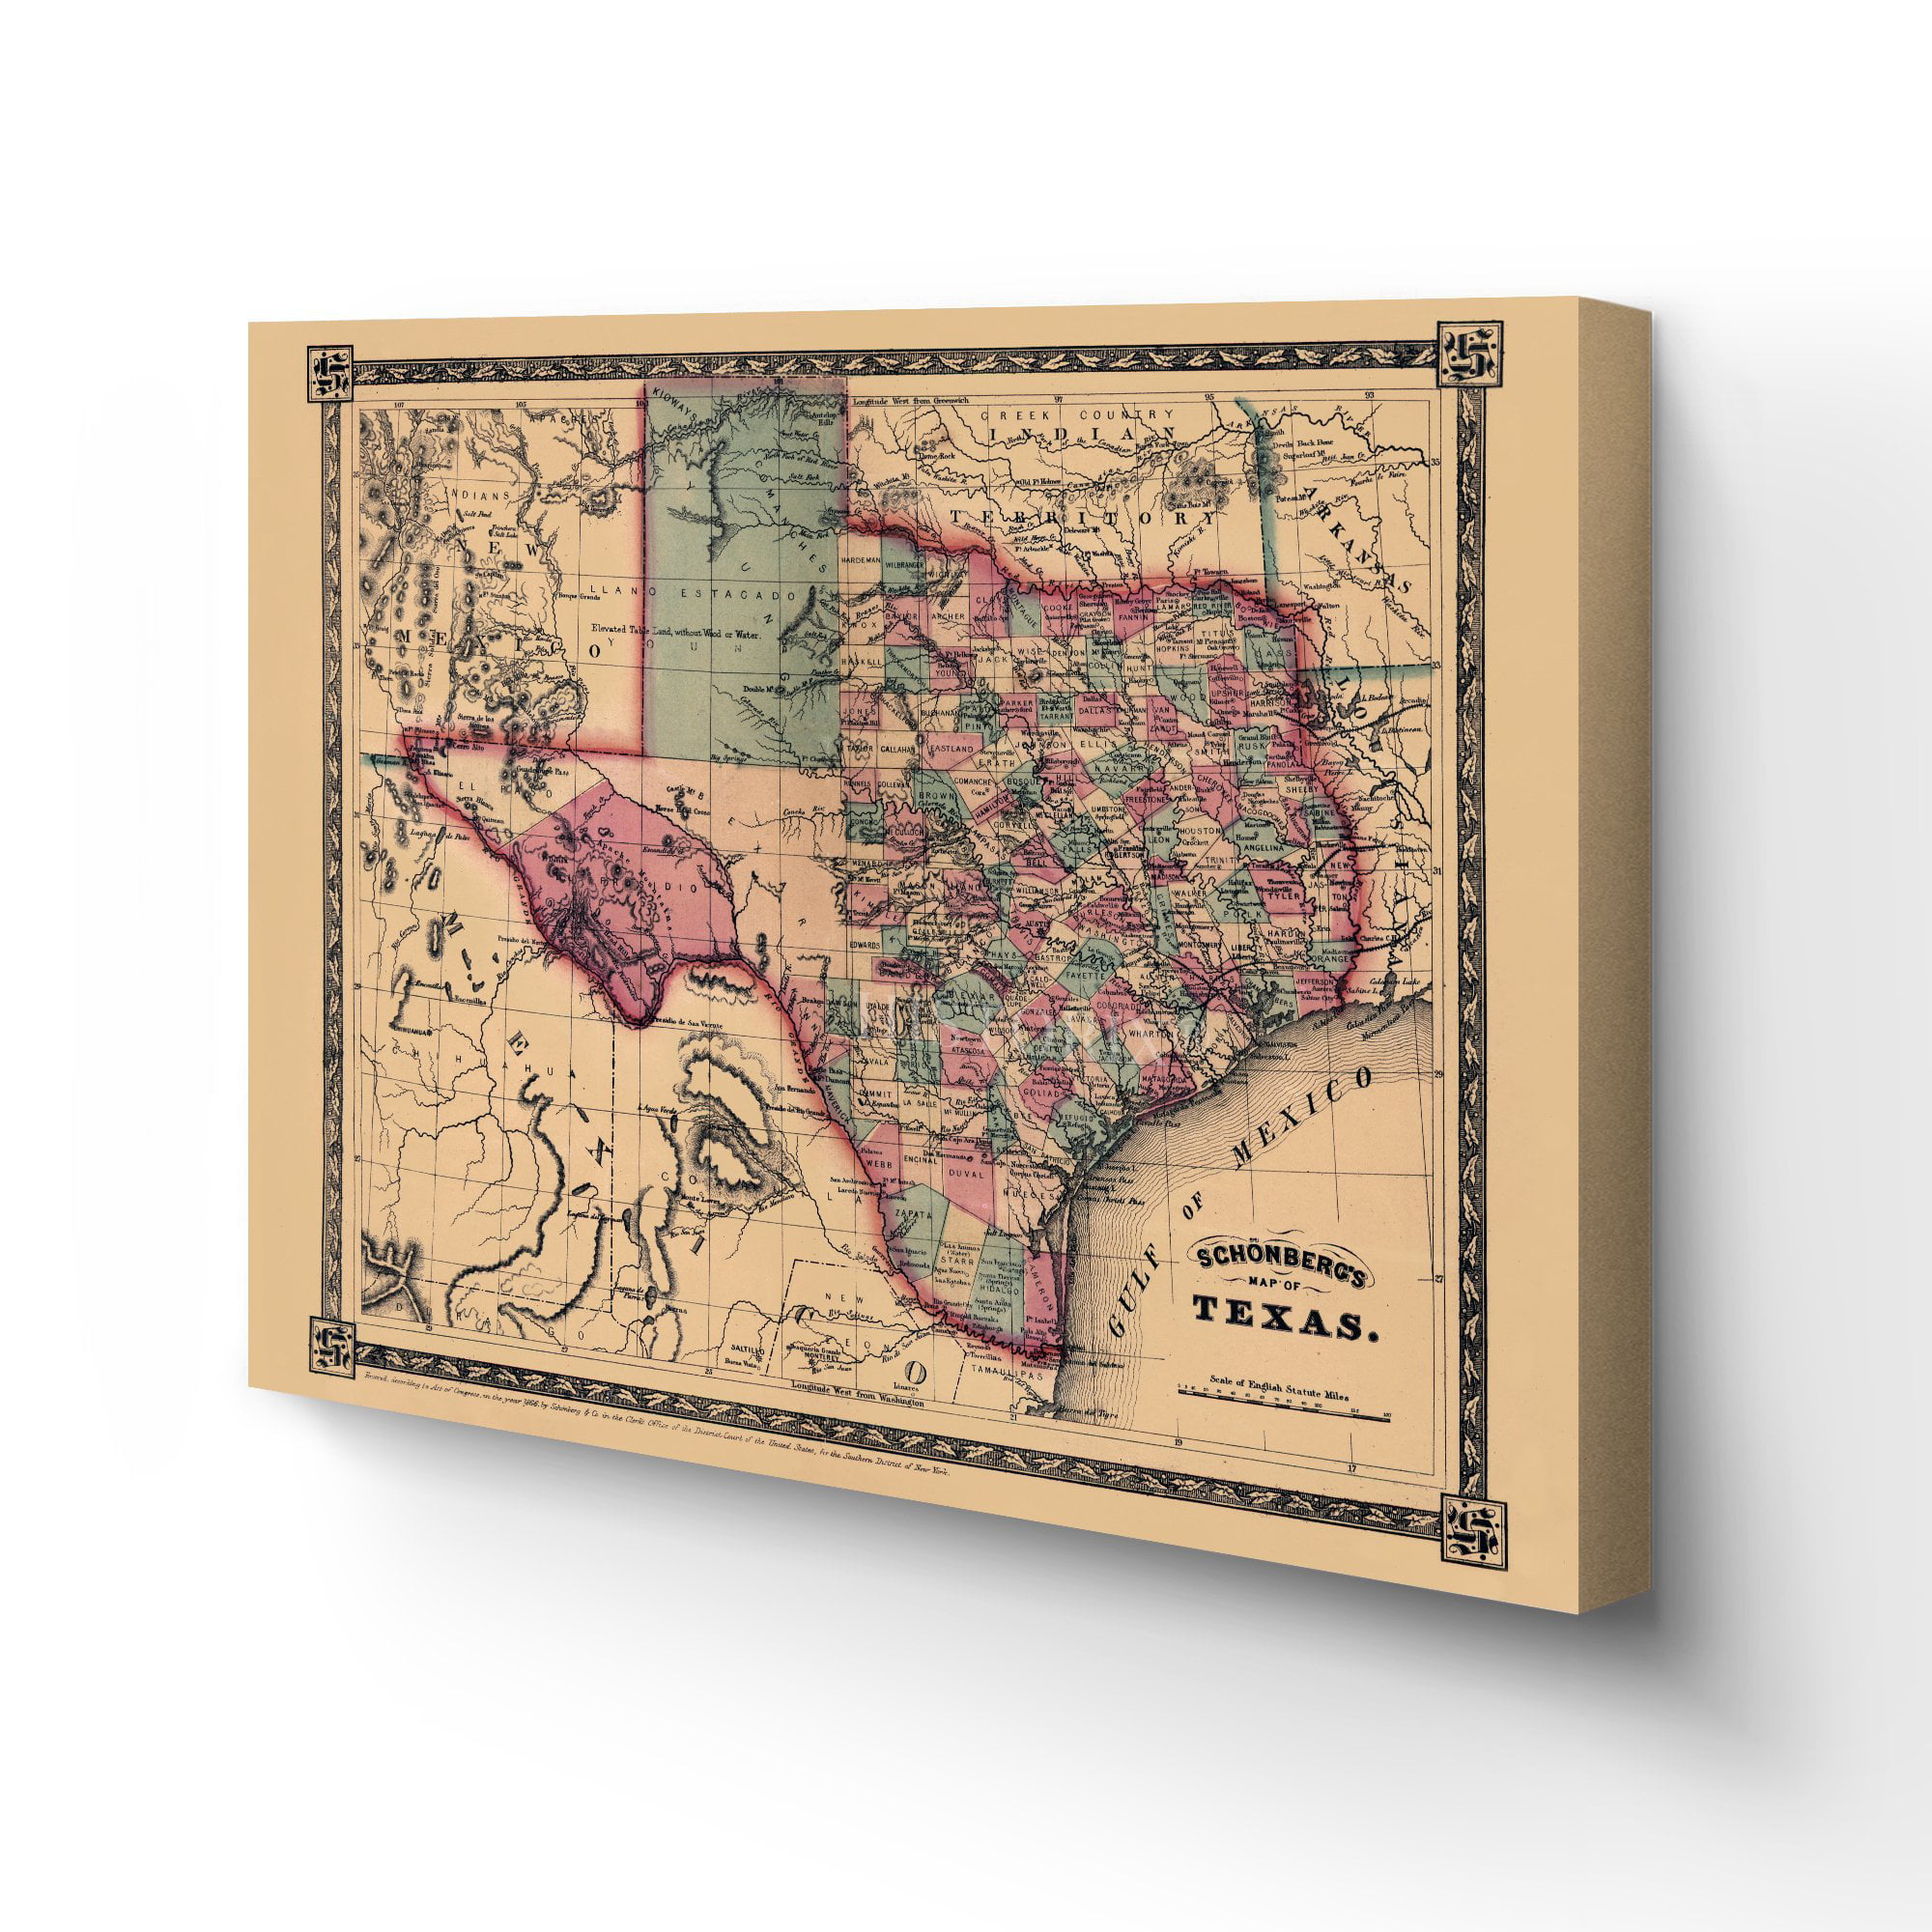 1866 Texas and Southwest United States Map Wall Art Poster Schonberg Print Decor 